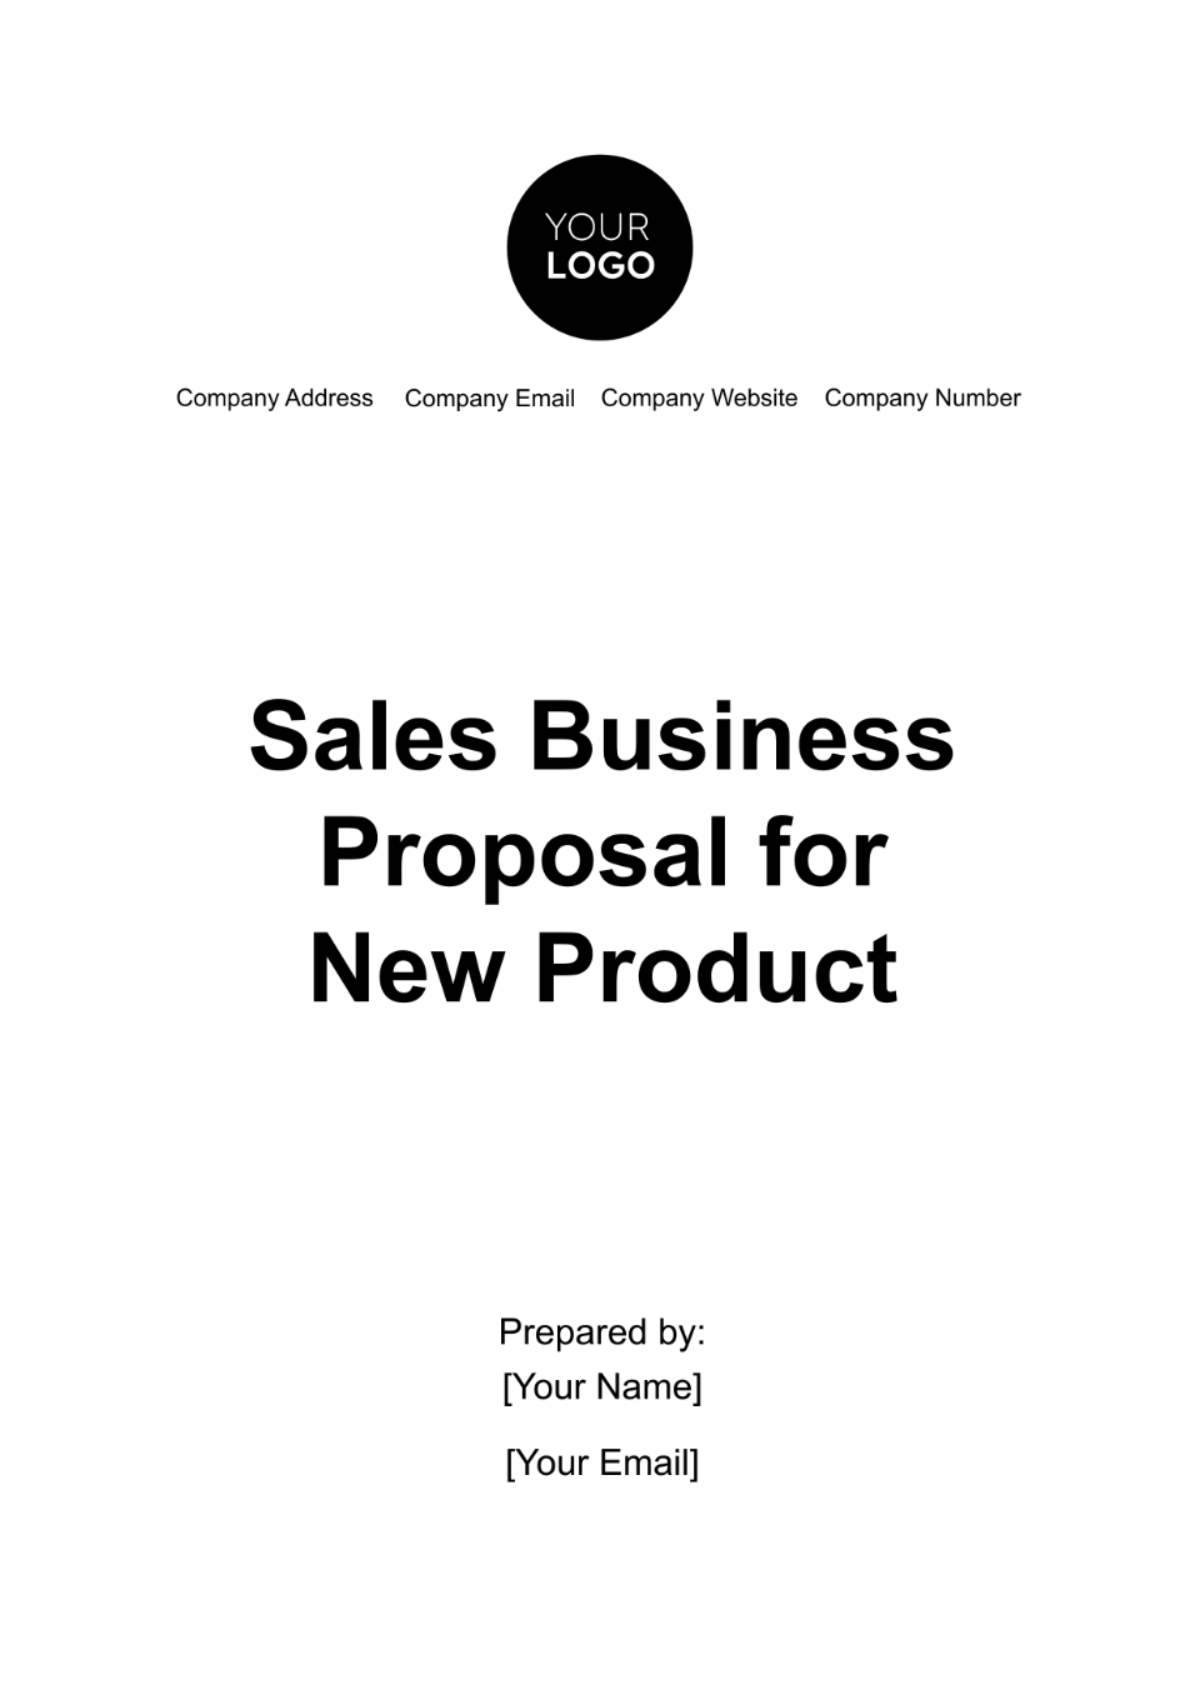 Free Sales Business Proposal for New Product Template